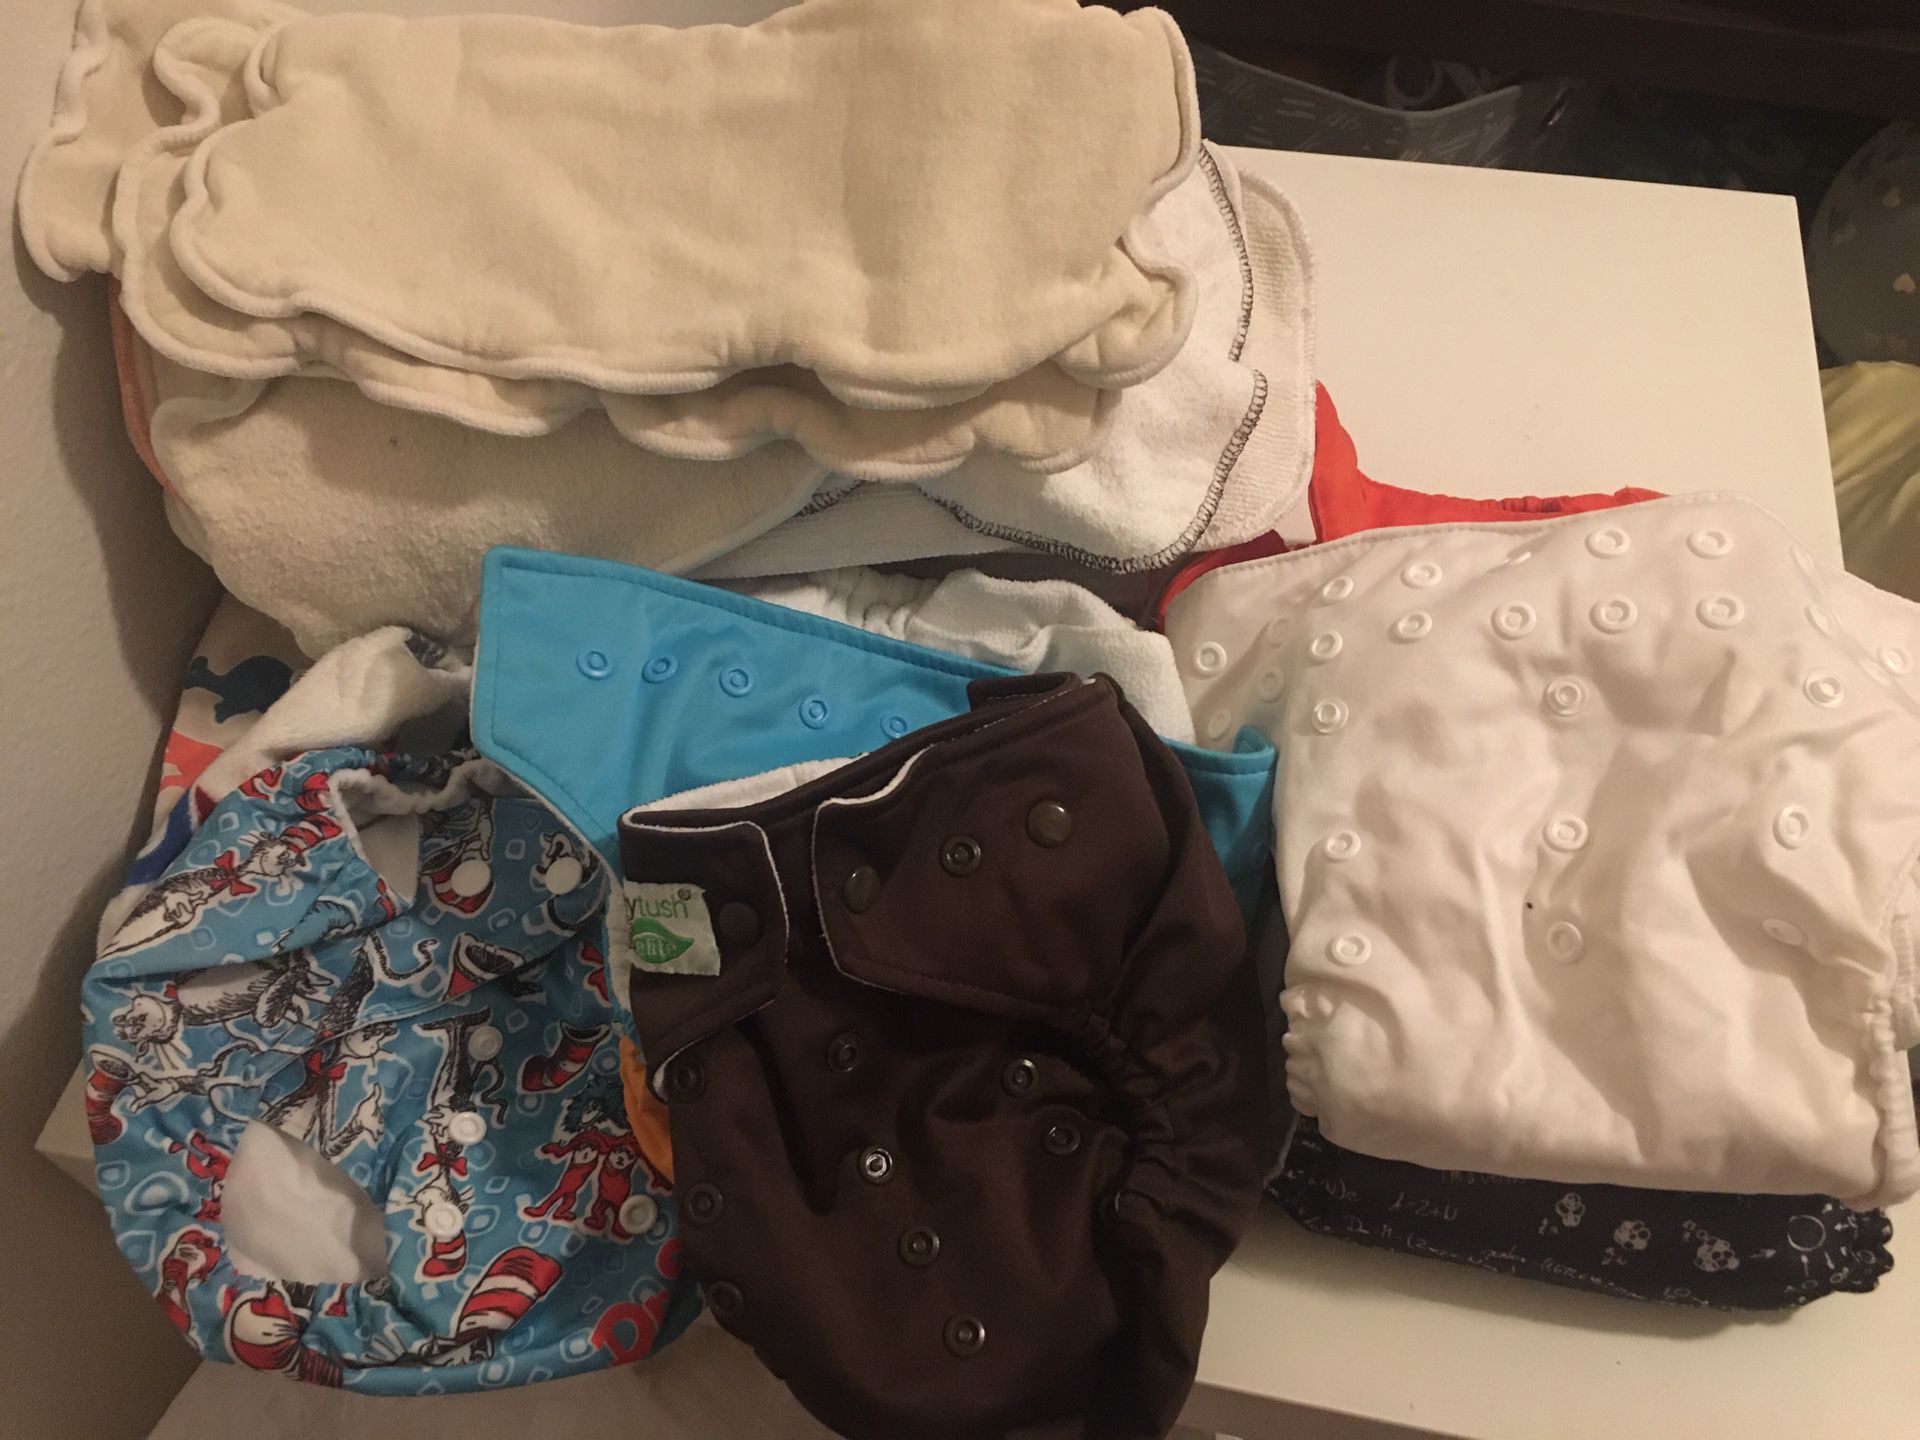 Cloth Diapers For Sale Plus a Bag Full of Inserts